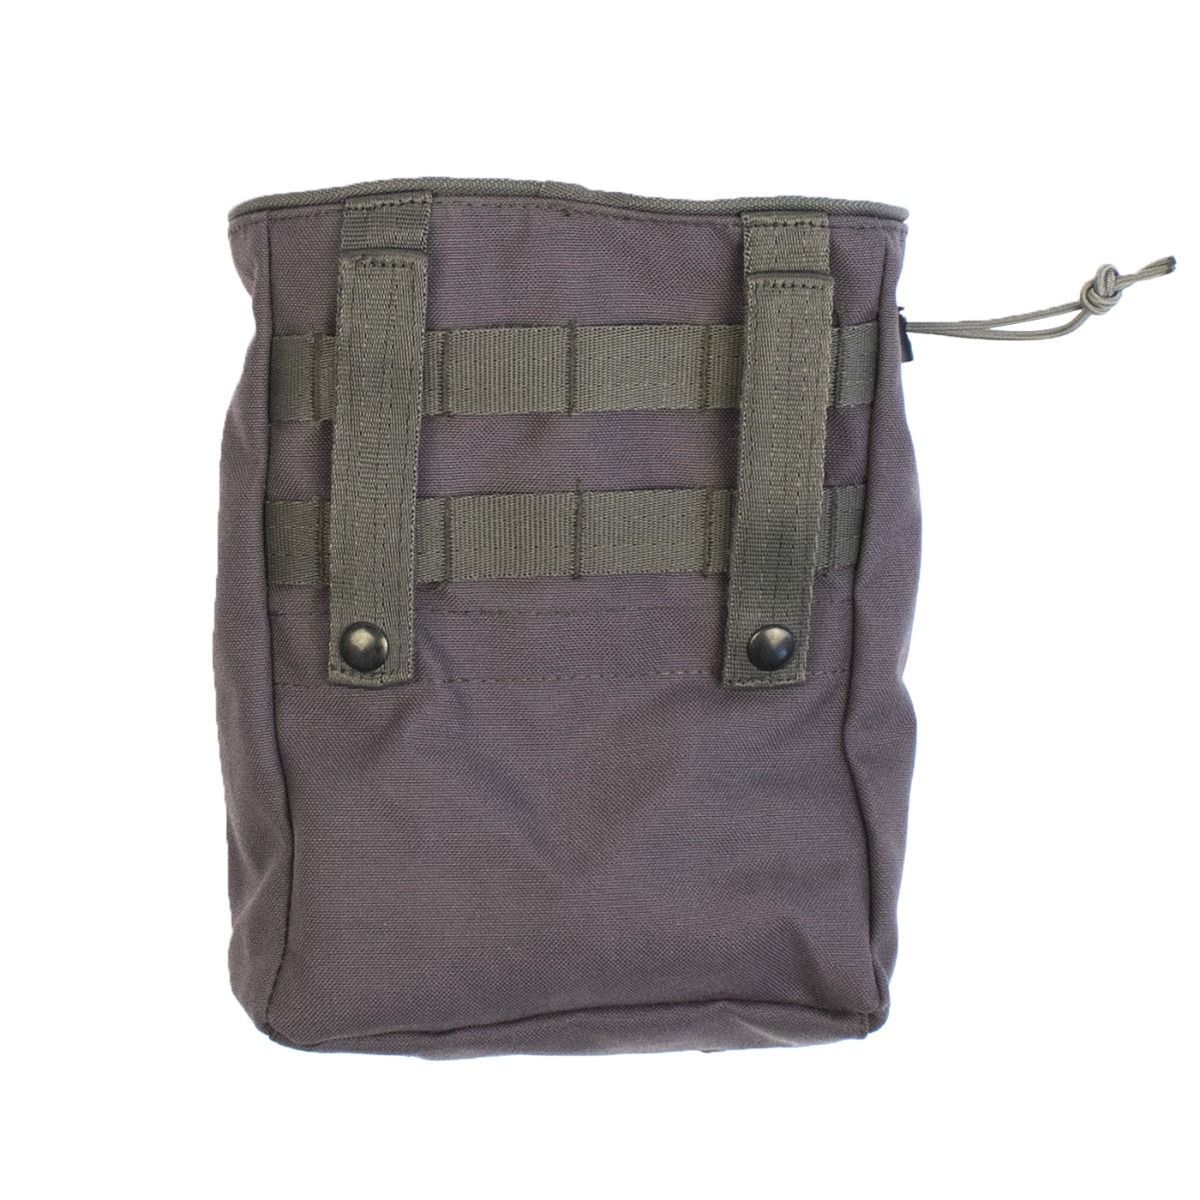 Ulfhednar PRS Empty Shell Cartridge Bag Pouch Molle #UH205 - Australian Tactical Precision